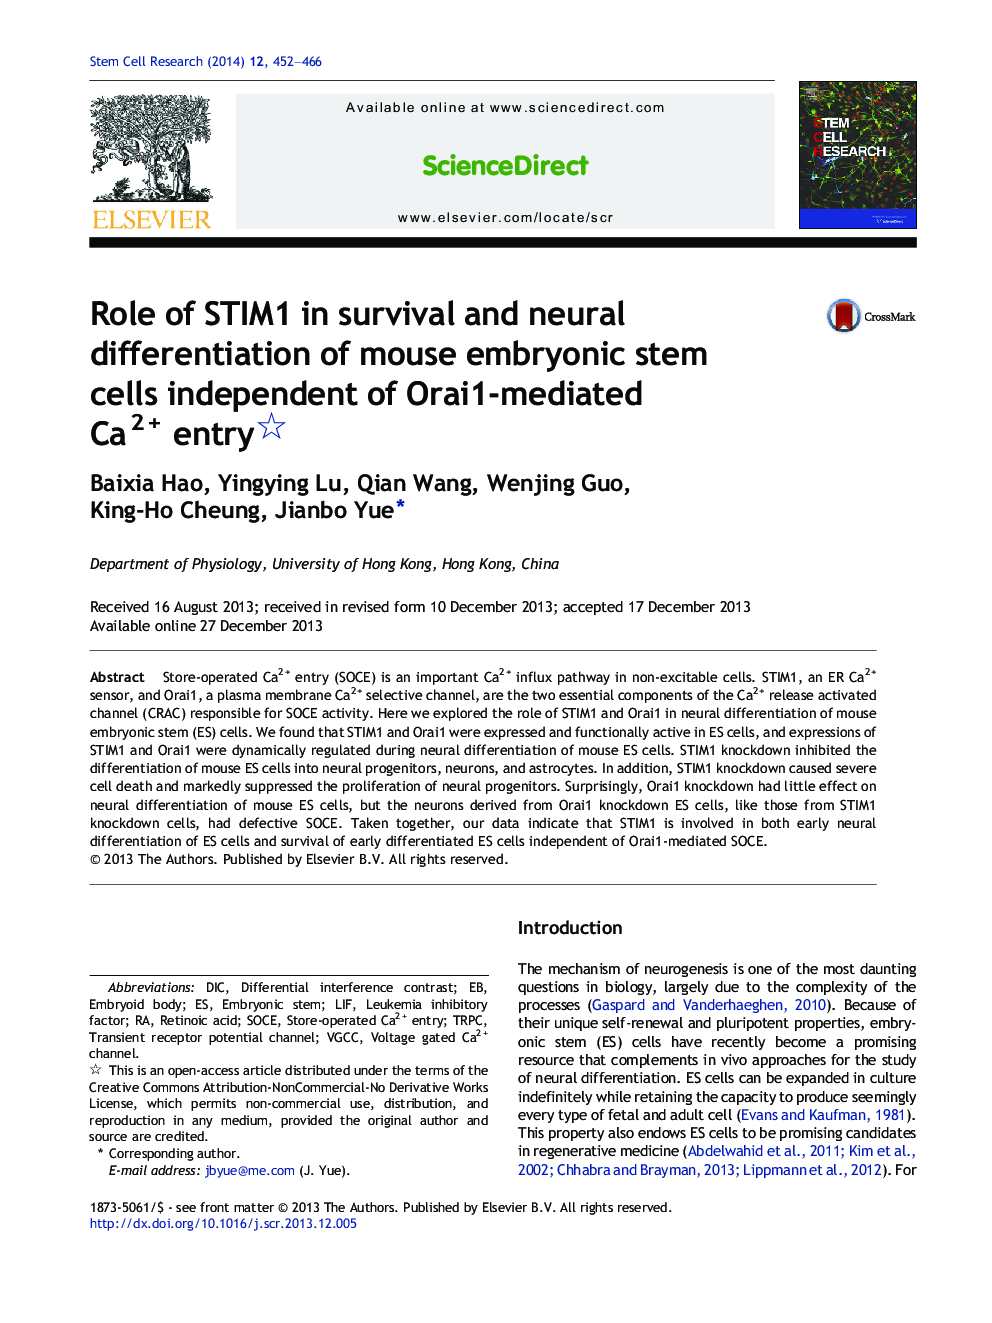 Role of STIM1 in survival and neural differentiation of mouse embryonic stem cells independent of Orai1-mediated Ca2 + entry 